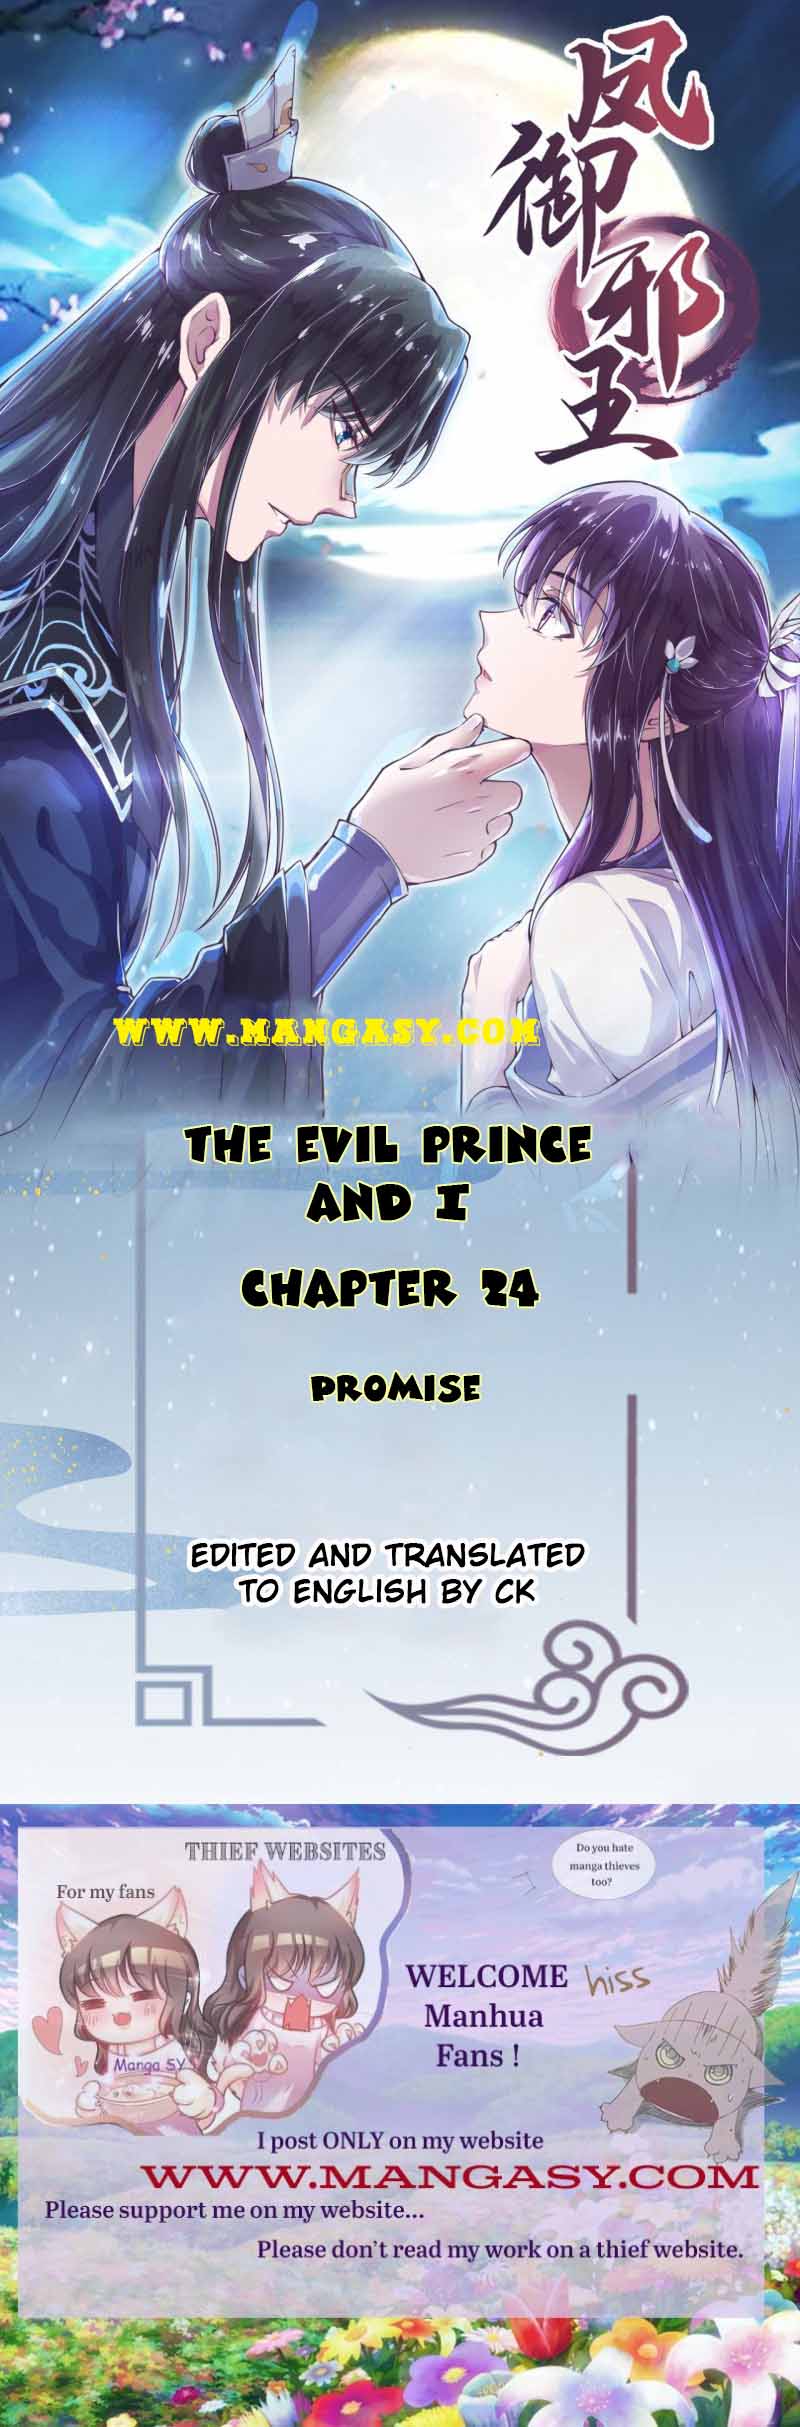 The Evil Prince And I Chapter 24 - Picture 1